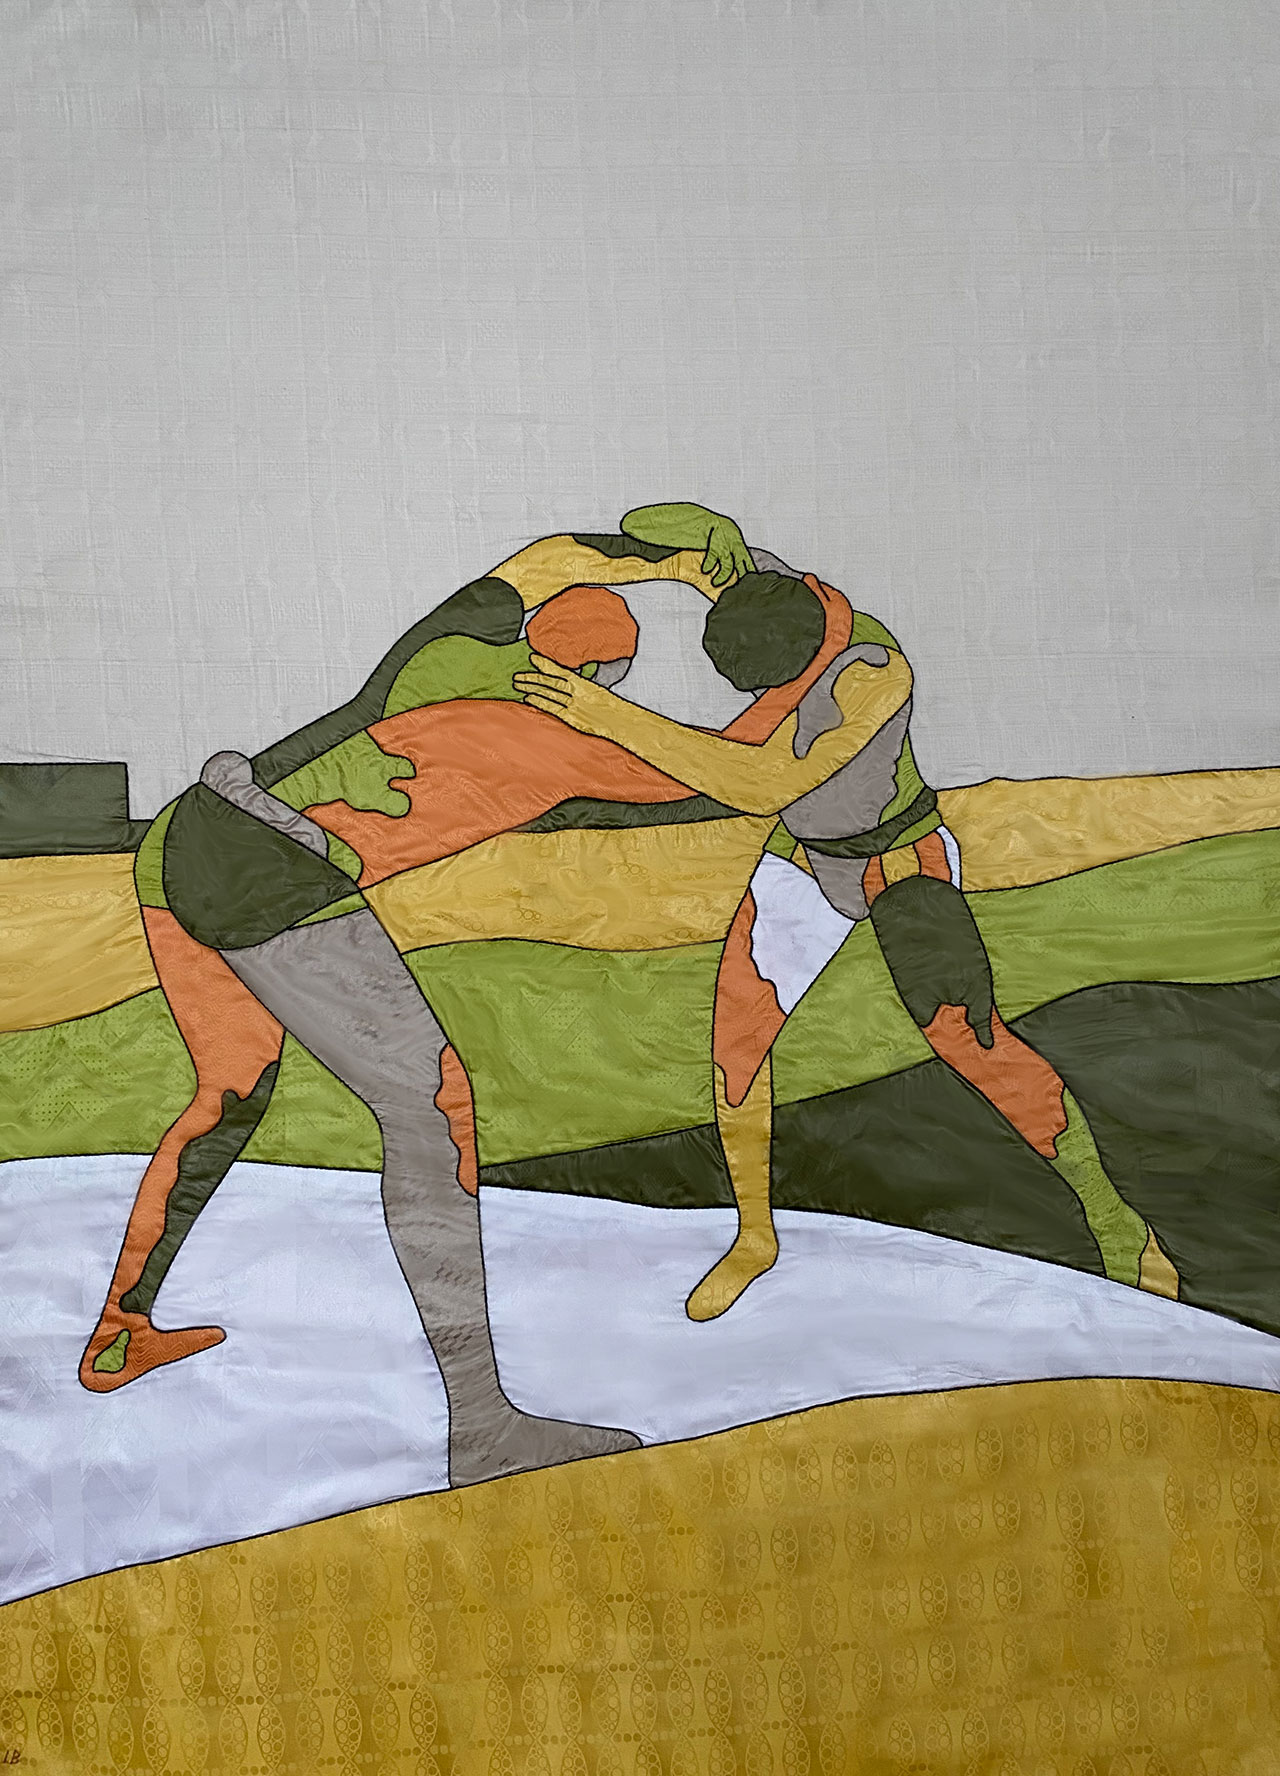 Louis Barthélemy, KHAYAMIYA 6 - PRESSURE from the Lutteurs/Wrestlers series, 2021. Appliquéd and hand embroidered «bazins» on cotton canvas. Unique edition.